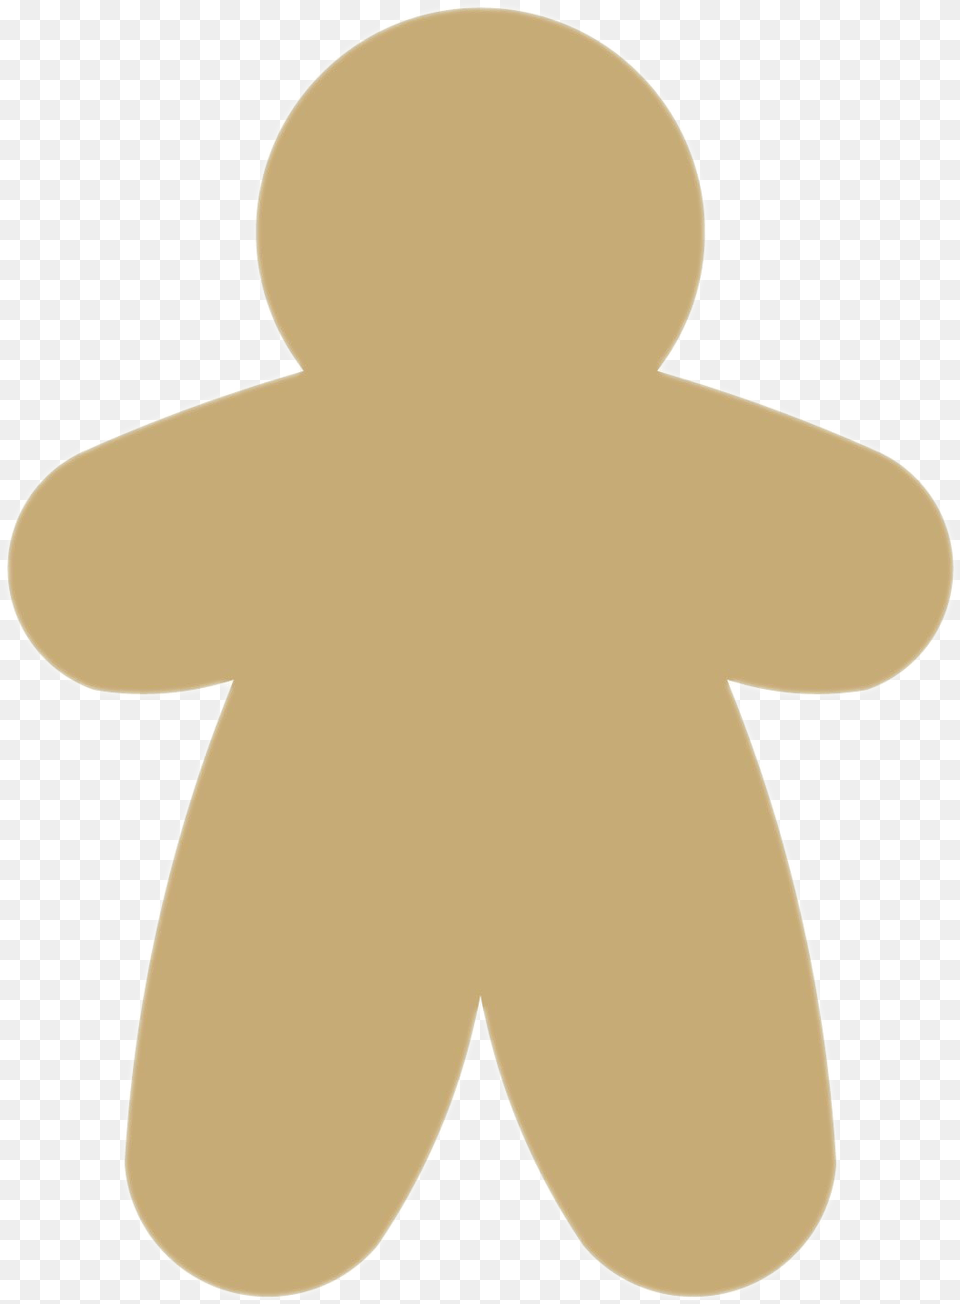 Gingerbread Man High Quality Image Gingerbread Man, Food, Sweets, Cookie Png